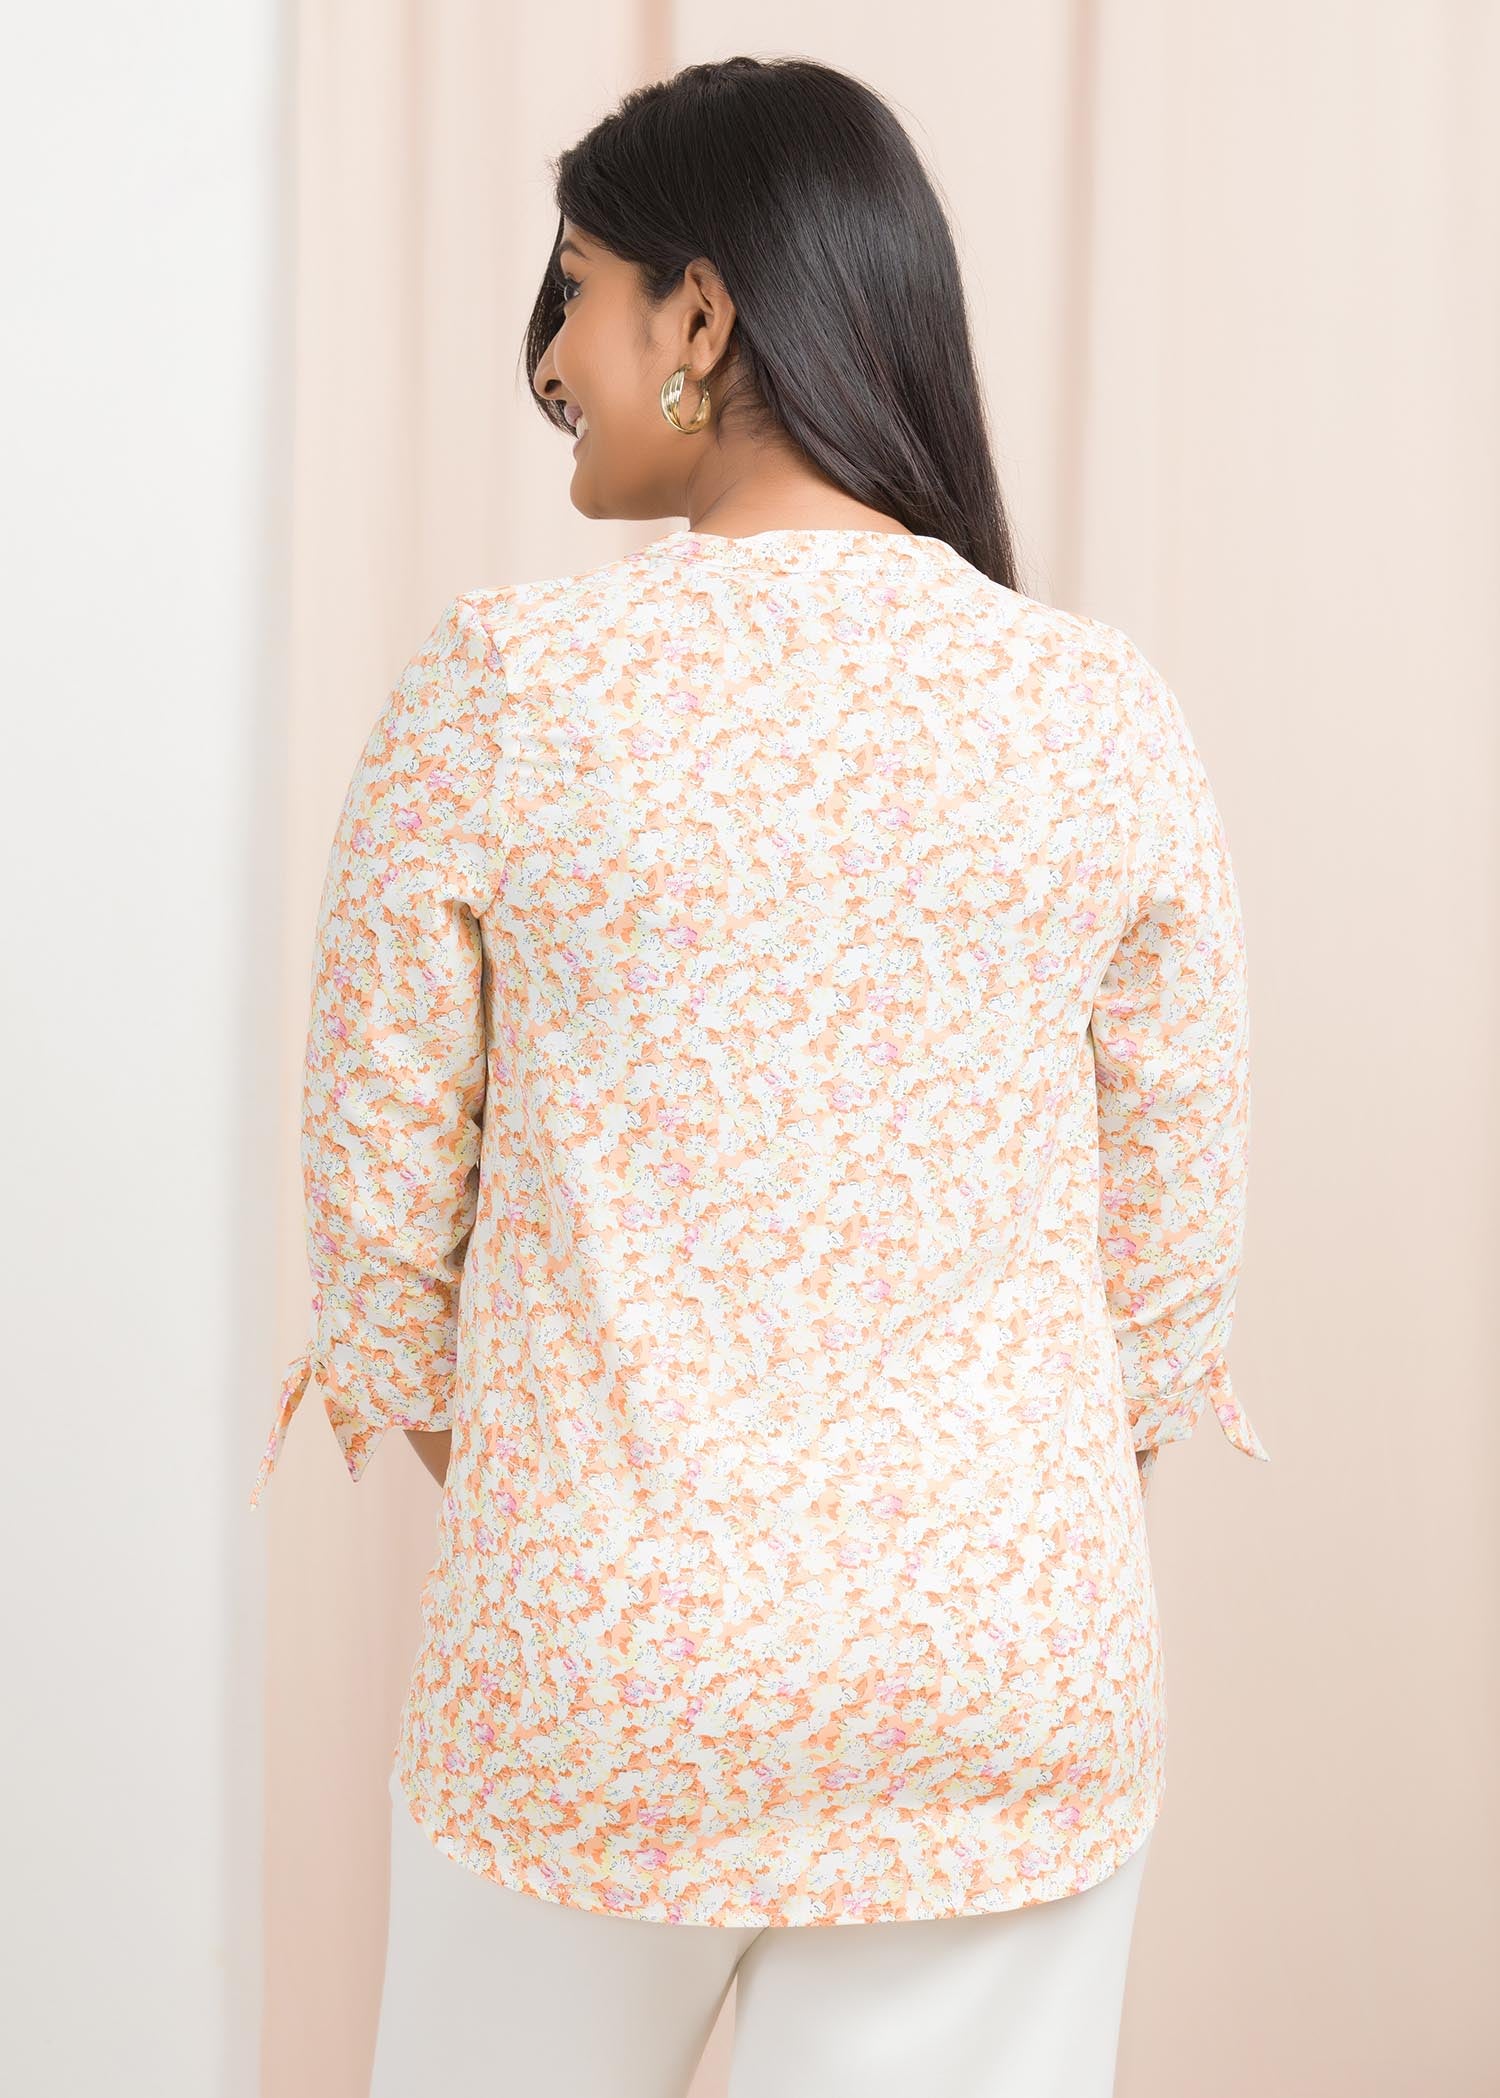 Printed blouse with sleeve detail